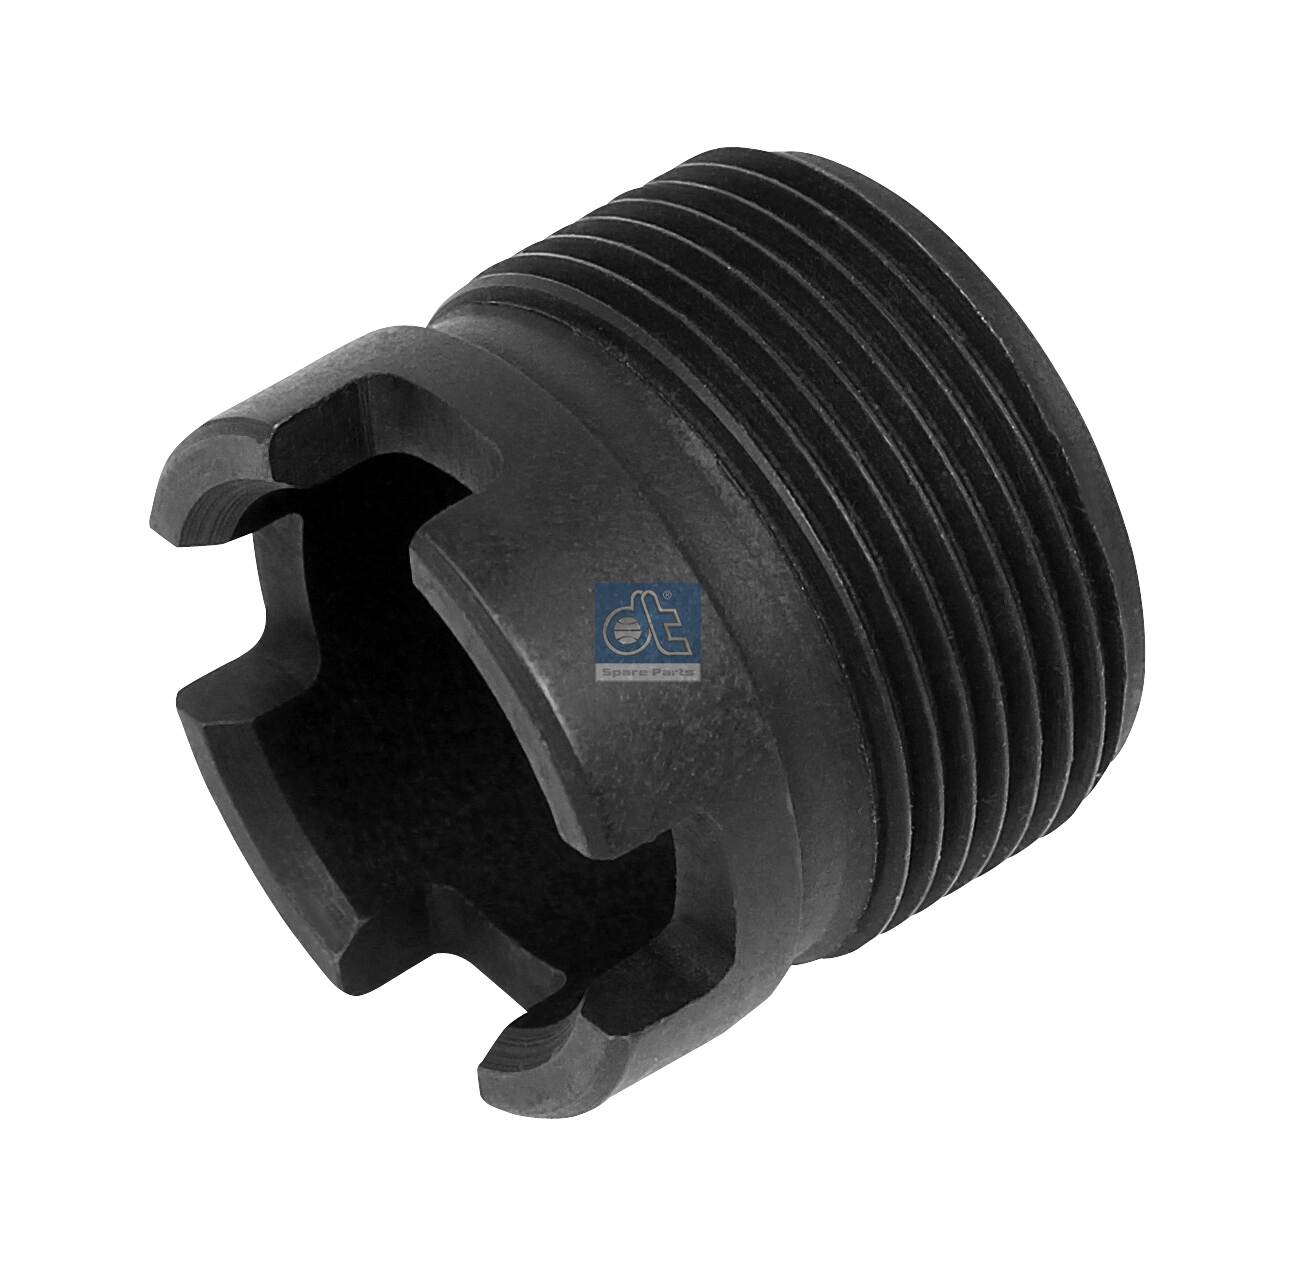 3.20019, Sleeve, nozzle holder, DT Spare Parts, 51.10108.0005, 51.10108-0005, 51101080005